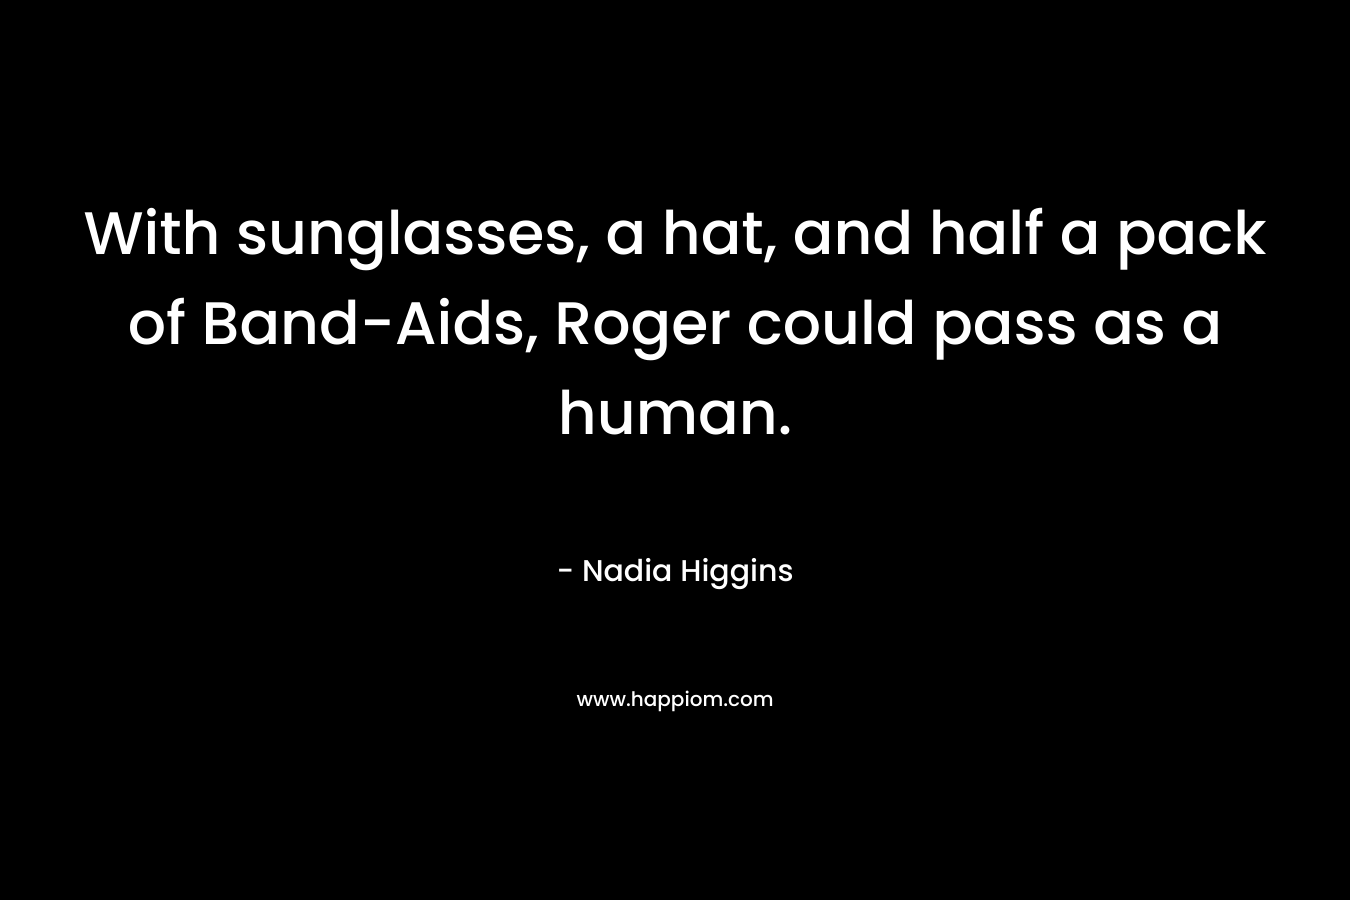 With sunglasses, a hat, and half a pack of Band-Aids, Roger could pass as a human. – Nadia Higgins